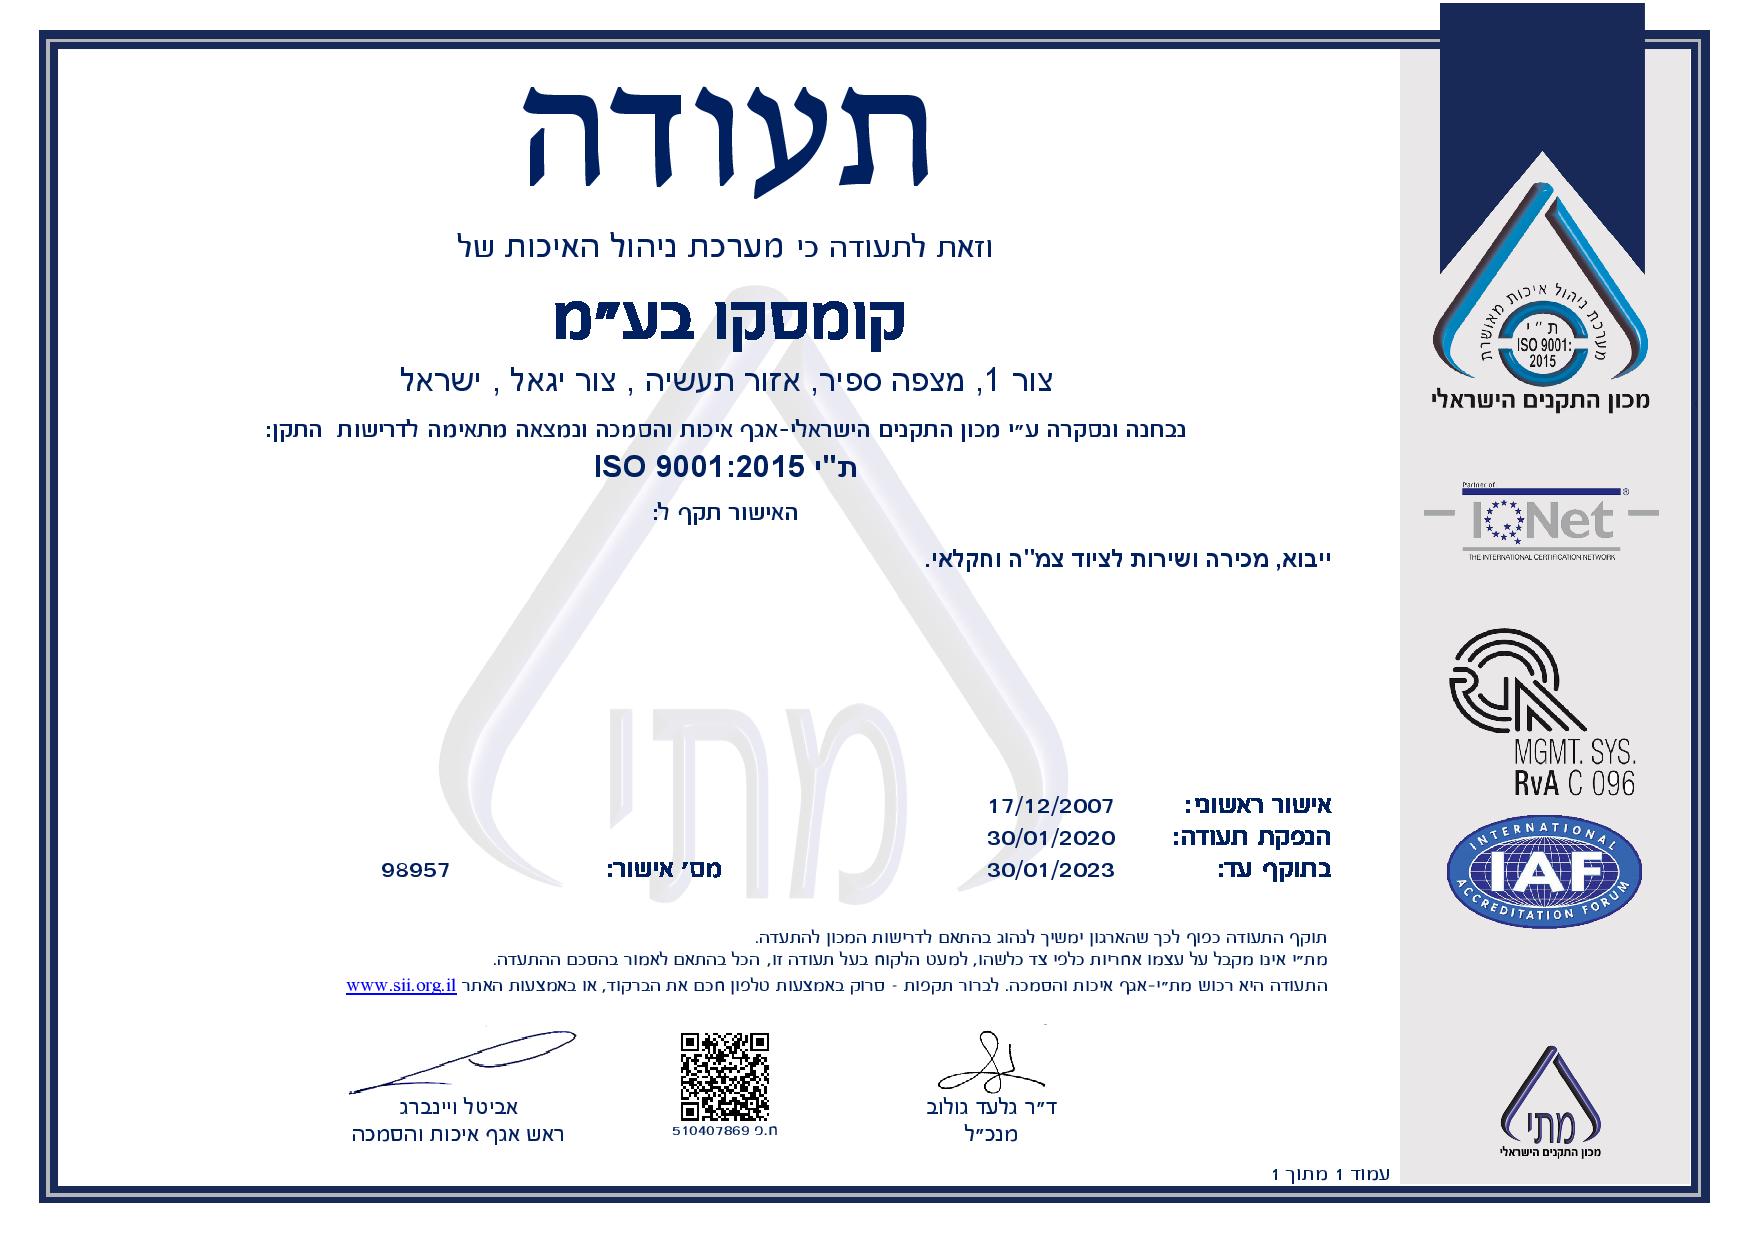 ISO 9001 Quality Management System certification - Hebrew version